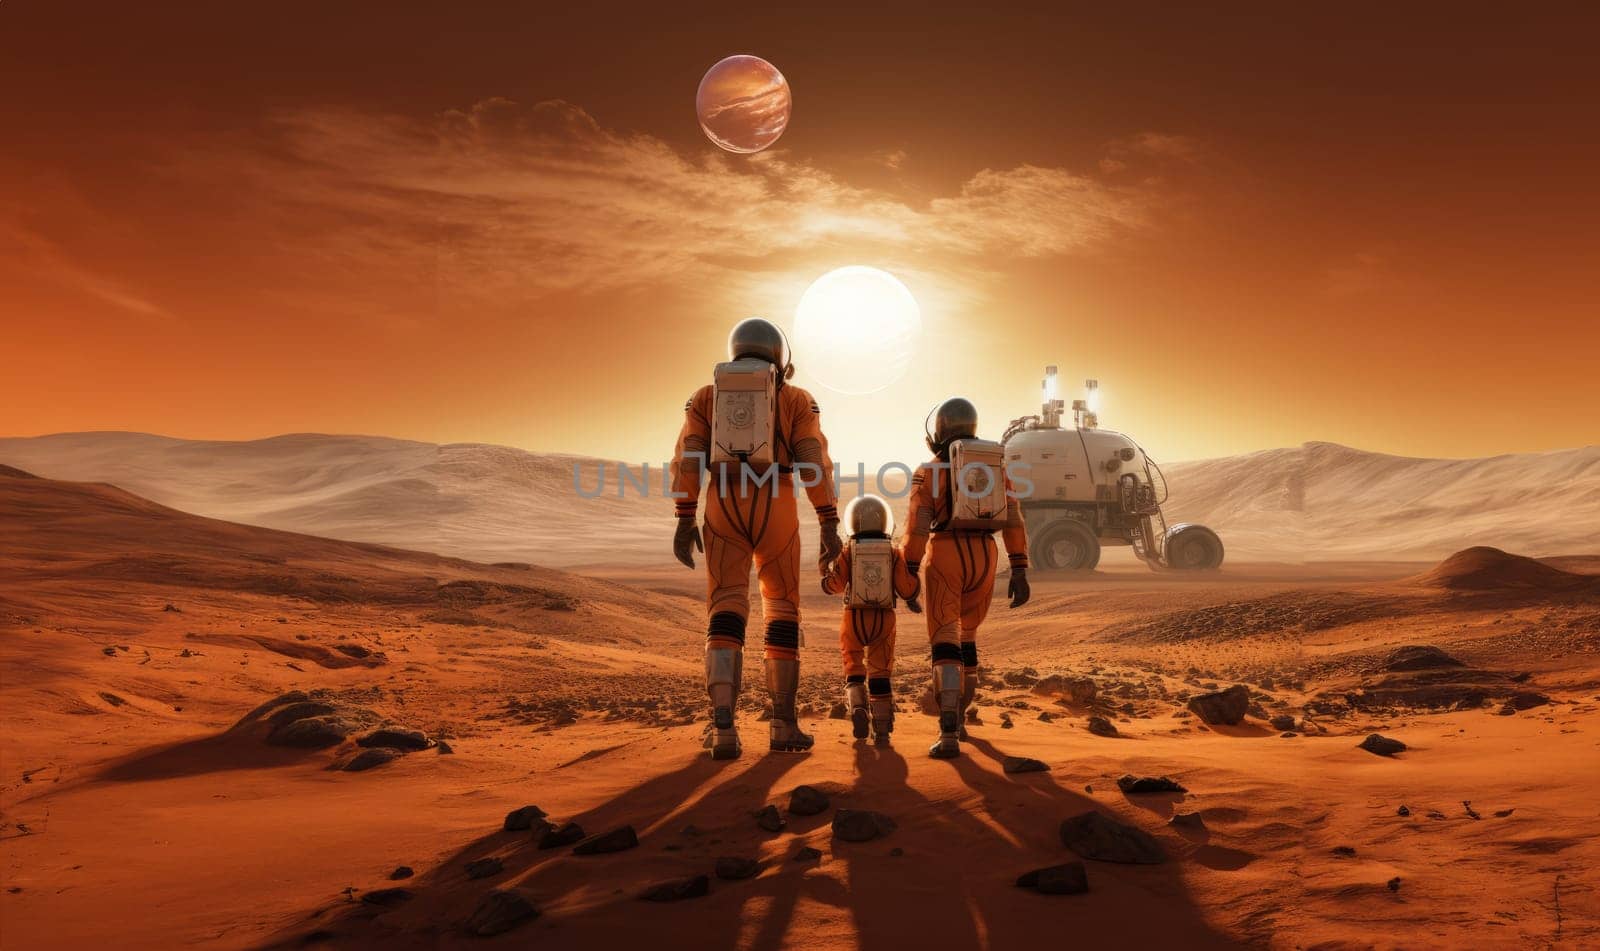 A futuristic, symbolic photograph depicts the beginnings of human civilization on Mars, showing a family walking on the surface of the red planet, evoking themes of exploration, settlement, and the pioneering spirit of humanity's extraterrestrial endeavors.Generated image.